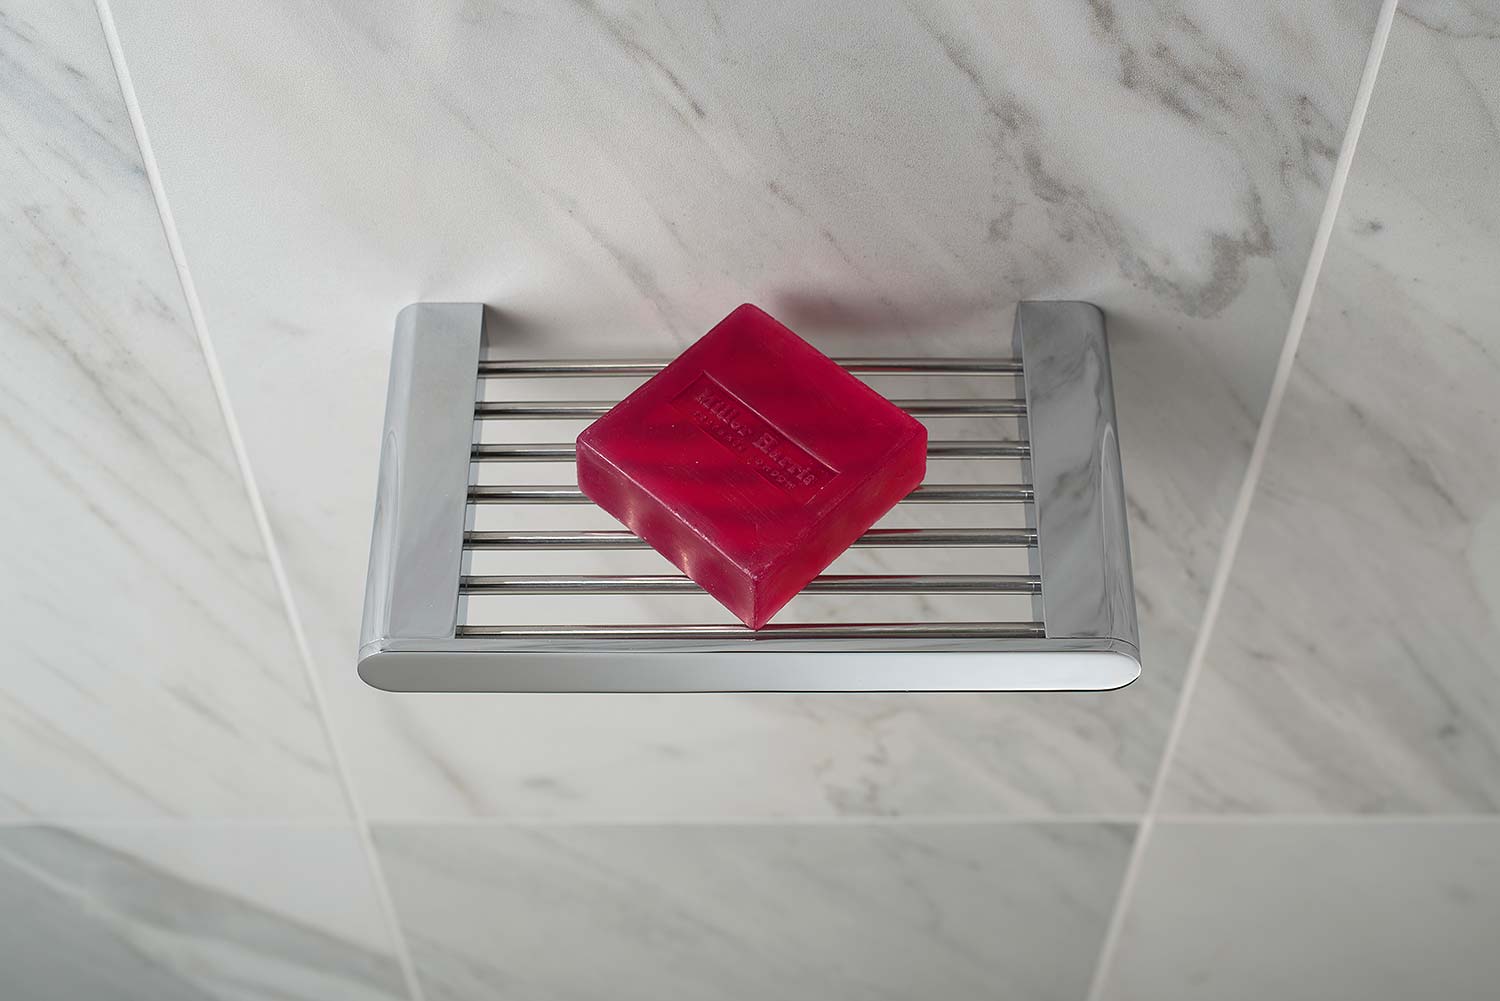 A bright red square soap on a modern chrome soap dish on a marble tiled wall.